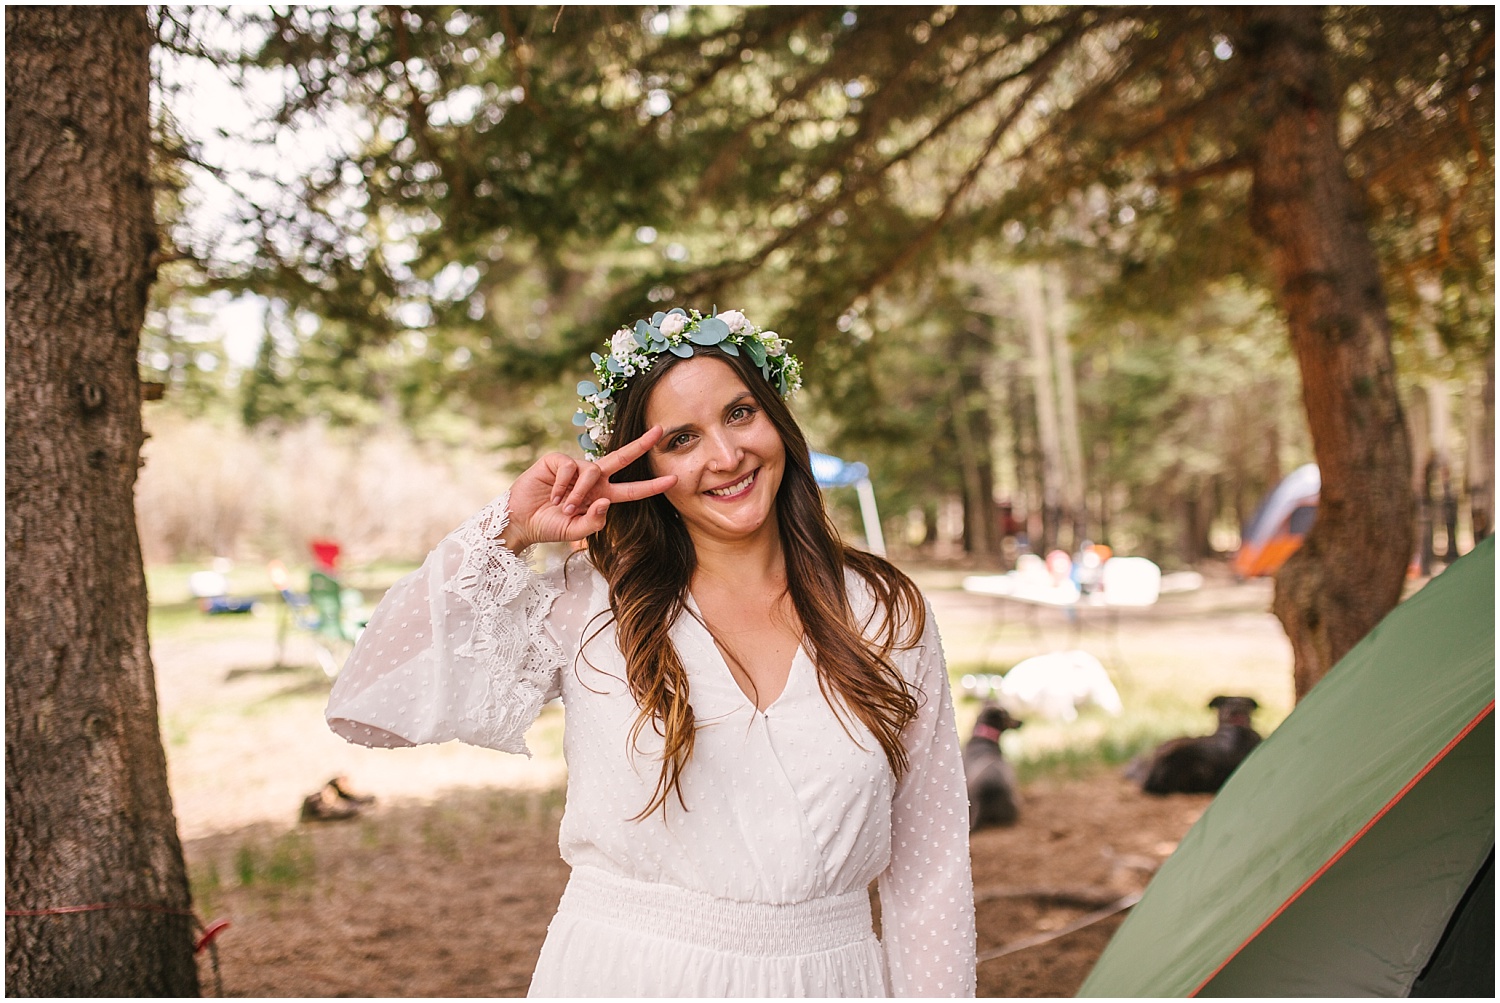 Bride in white romper and flower crown at campsite elopement